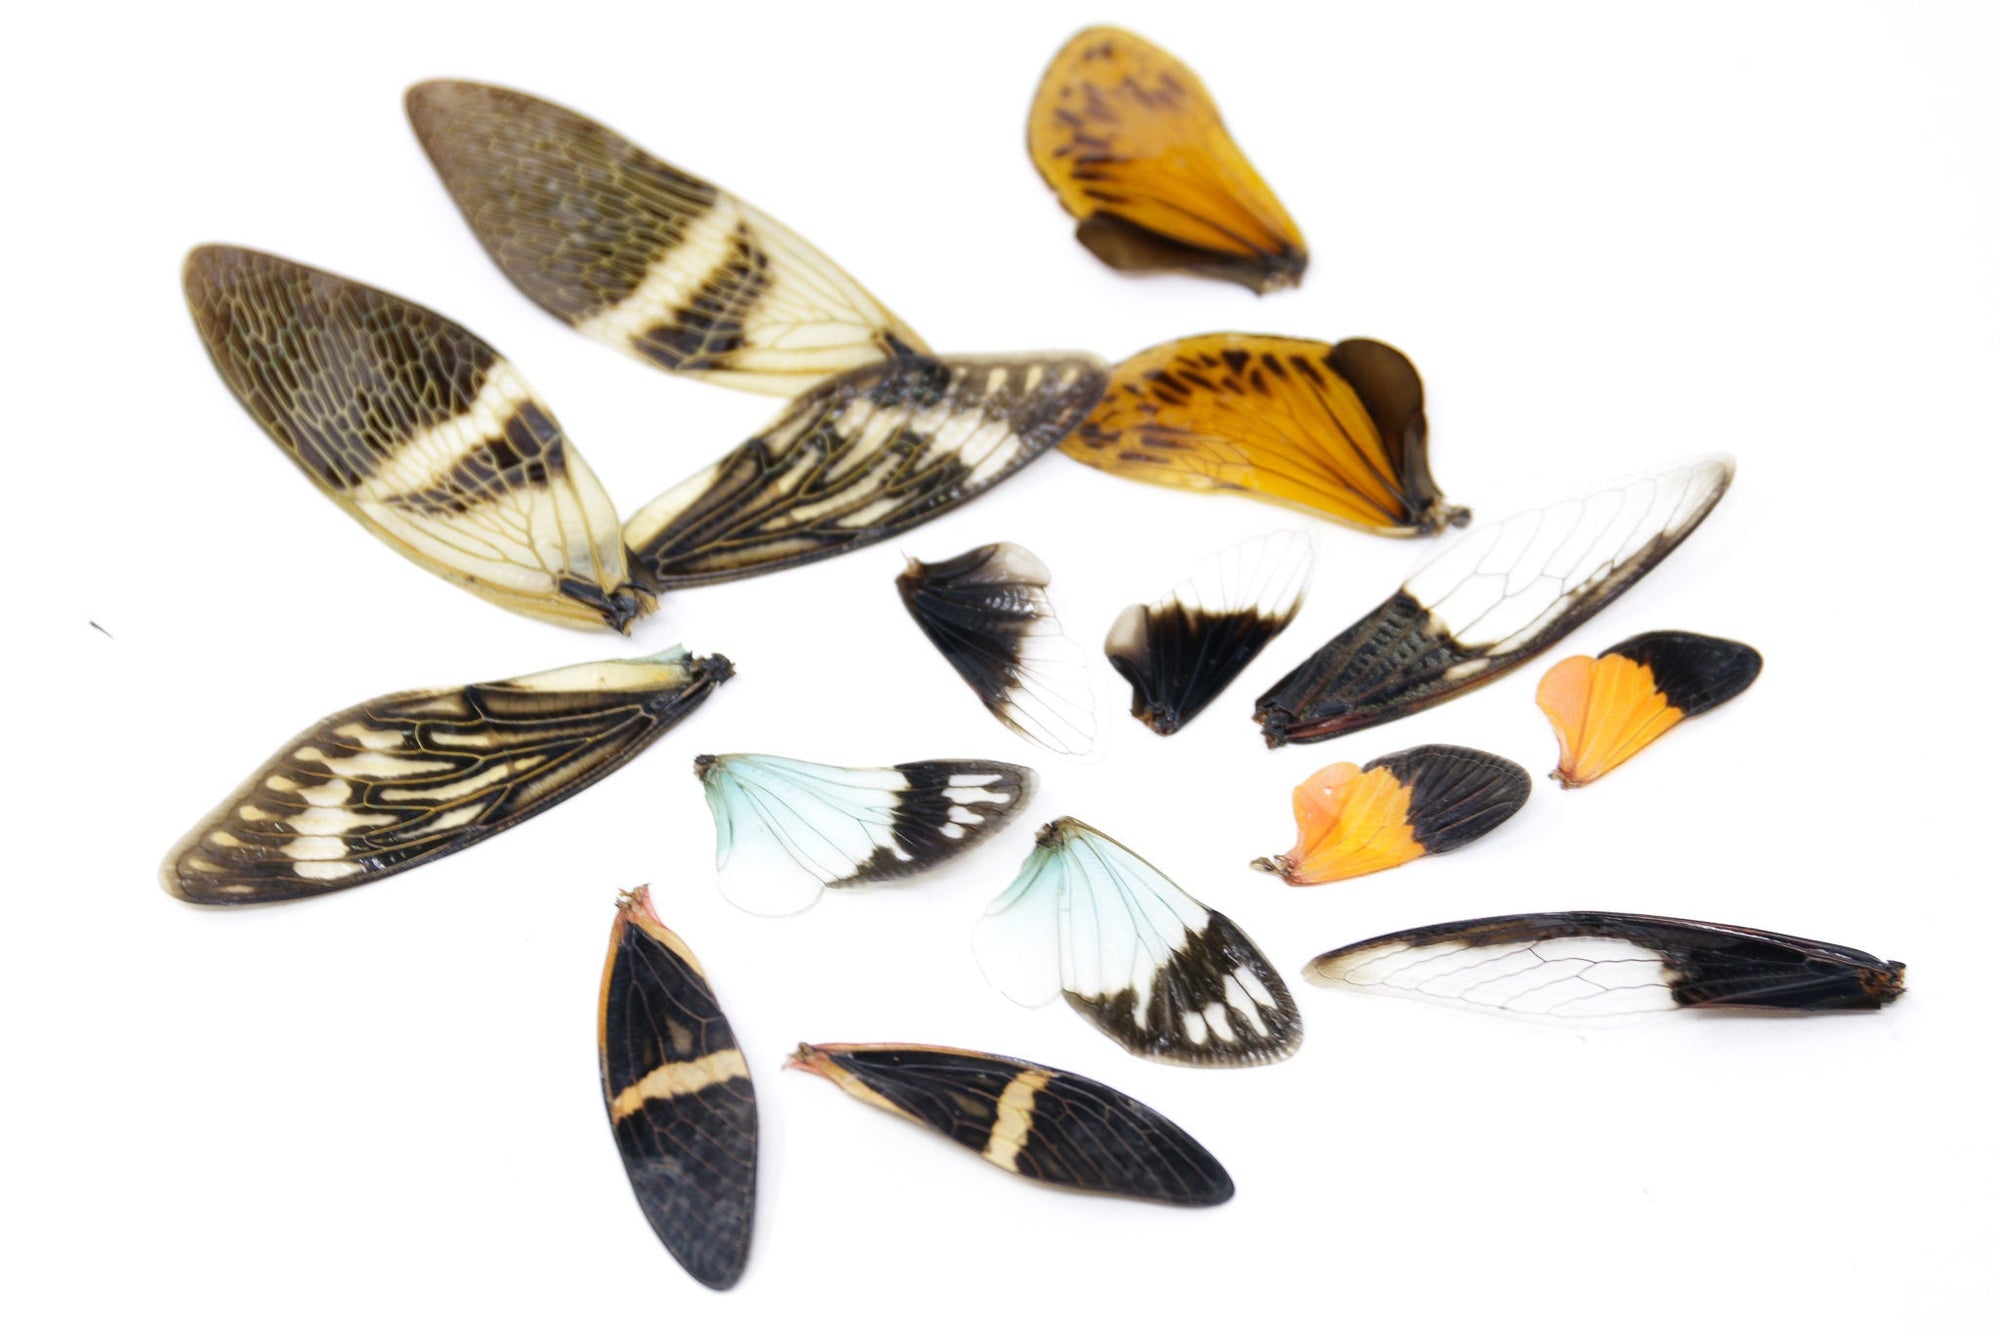 Loose Cicada Wings (16) Various Assorted, Colorful Insect Wings for Artistic Creation & Taxidermy